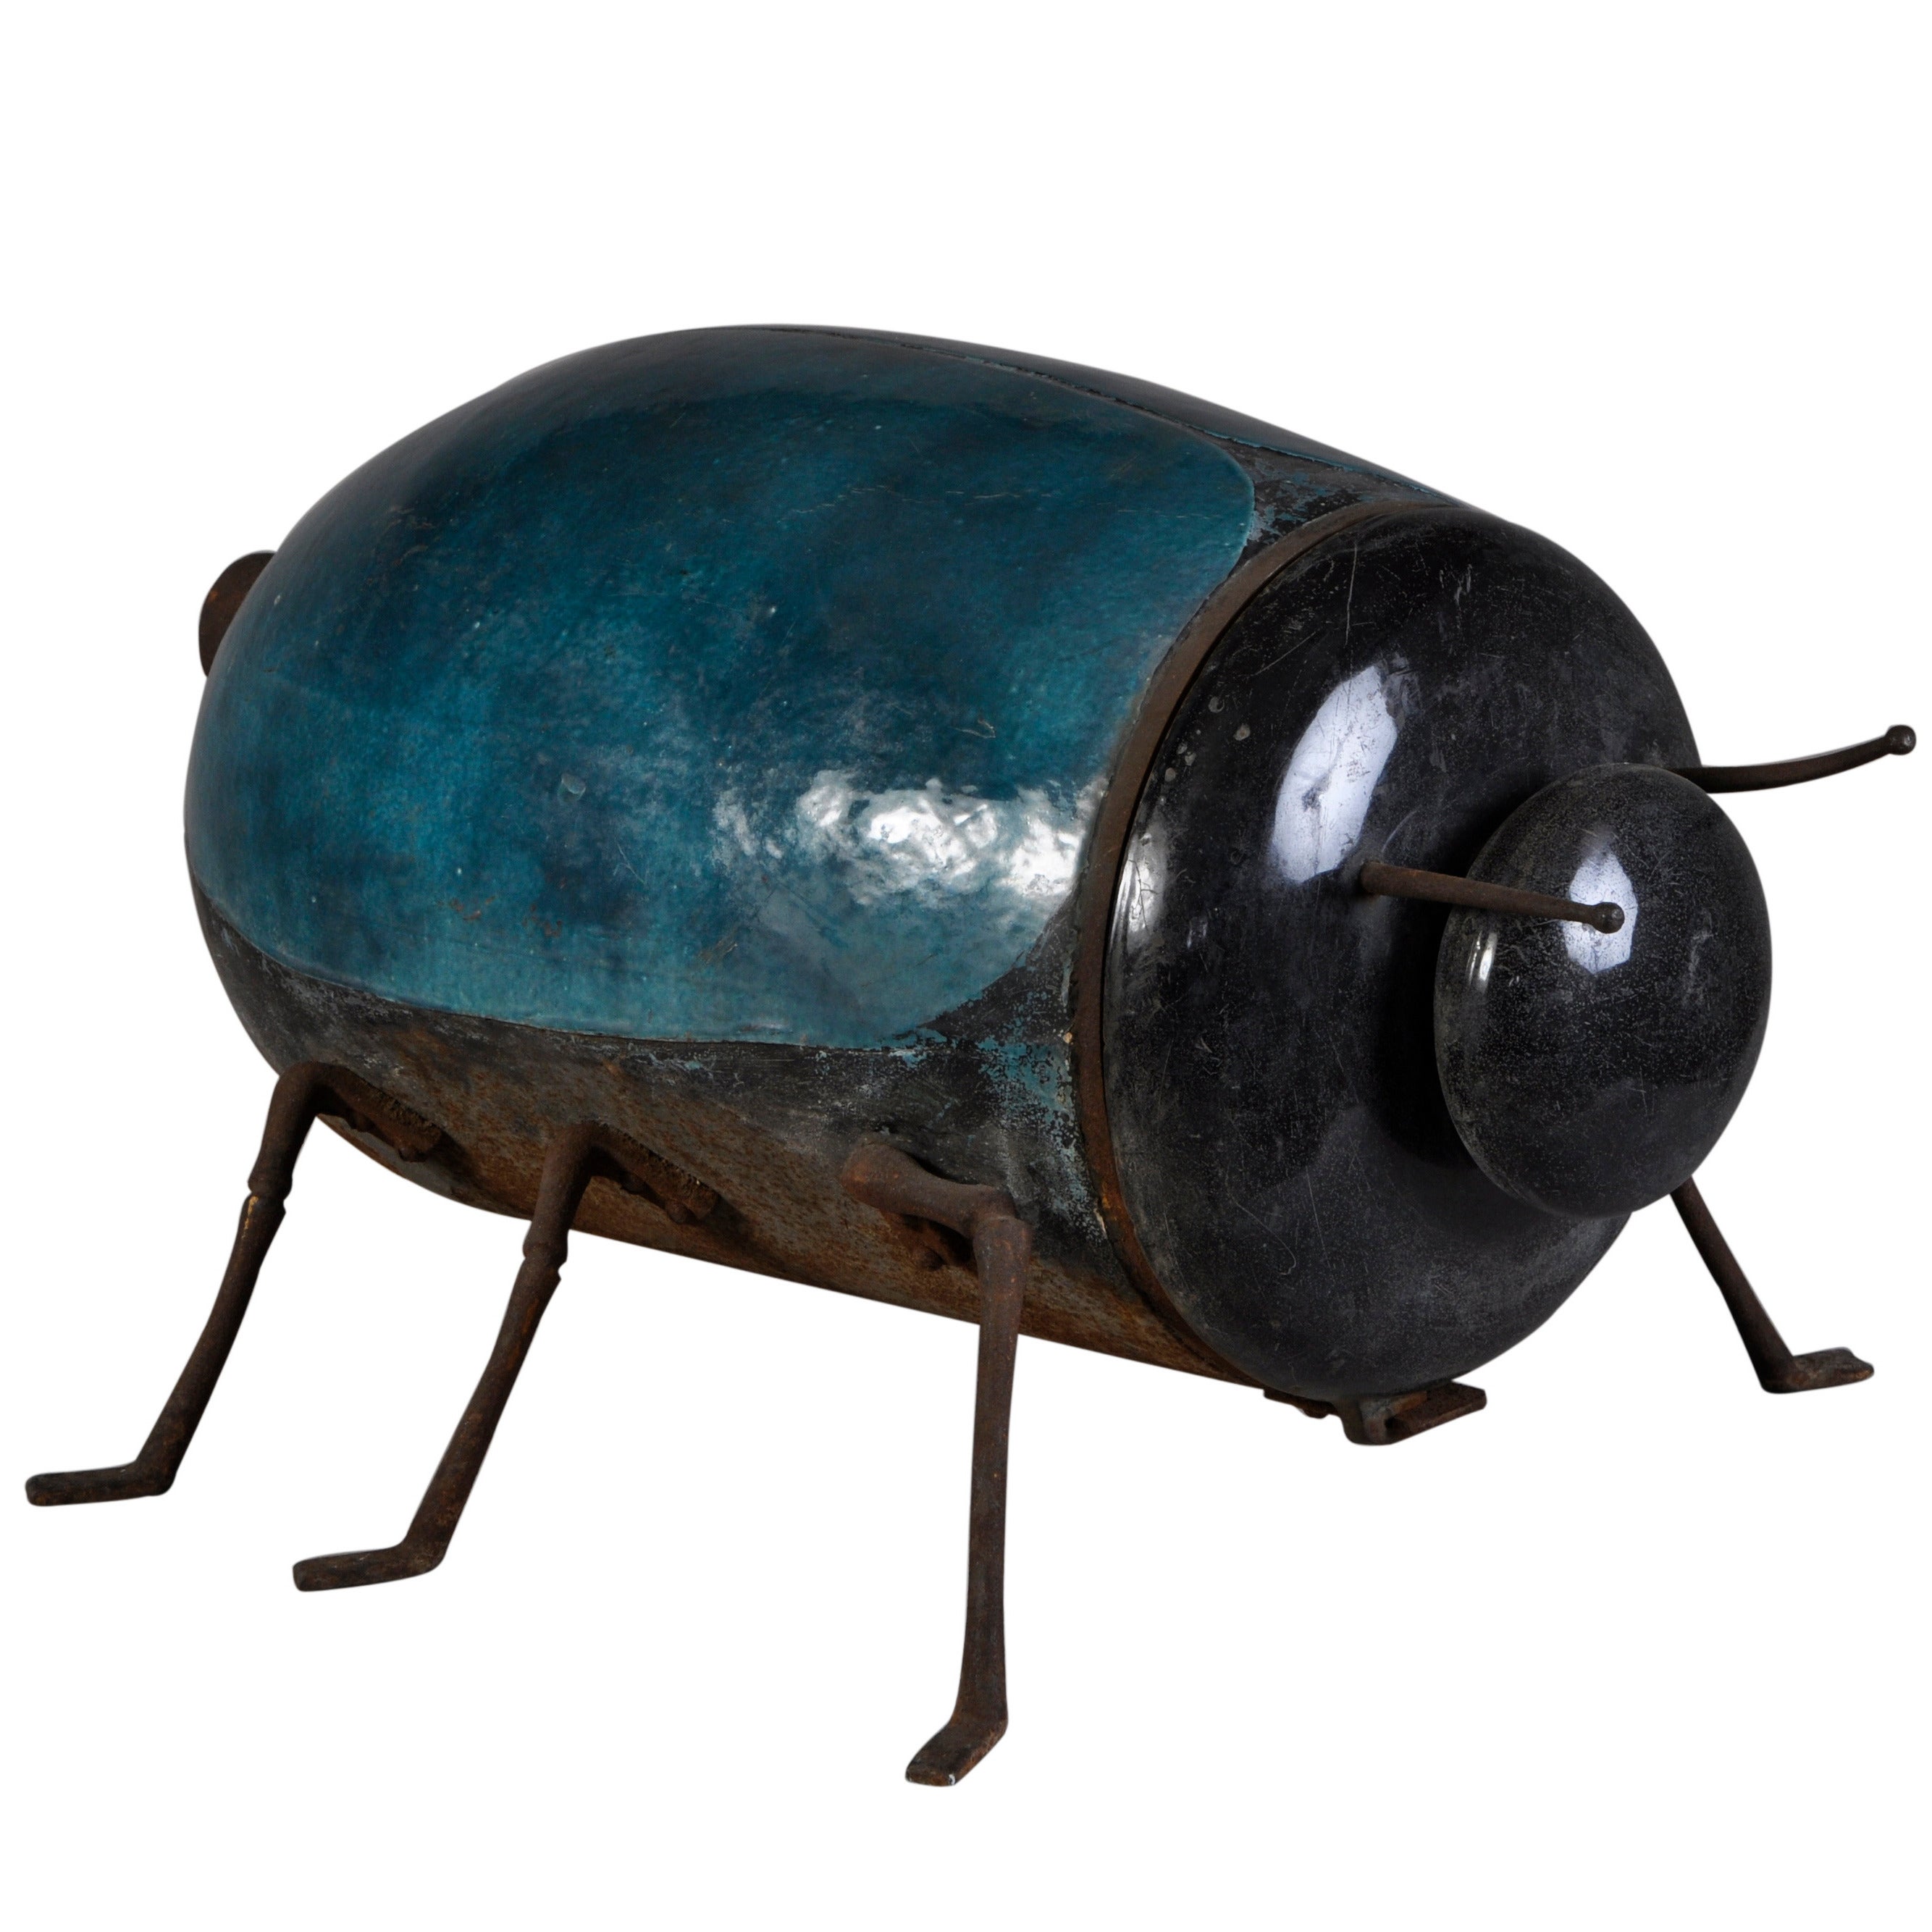 Zoomorphic Enameled Cast Iron Stove in a Form of a Scarab, 19th Century